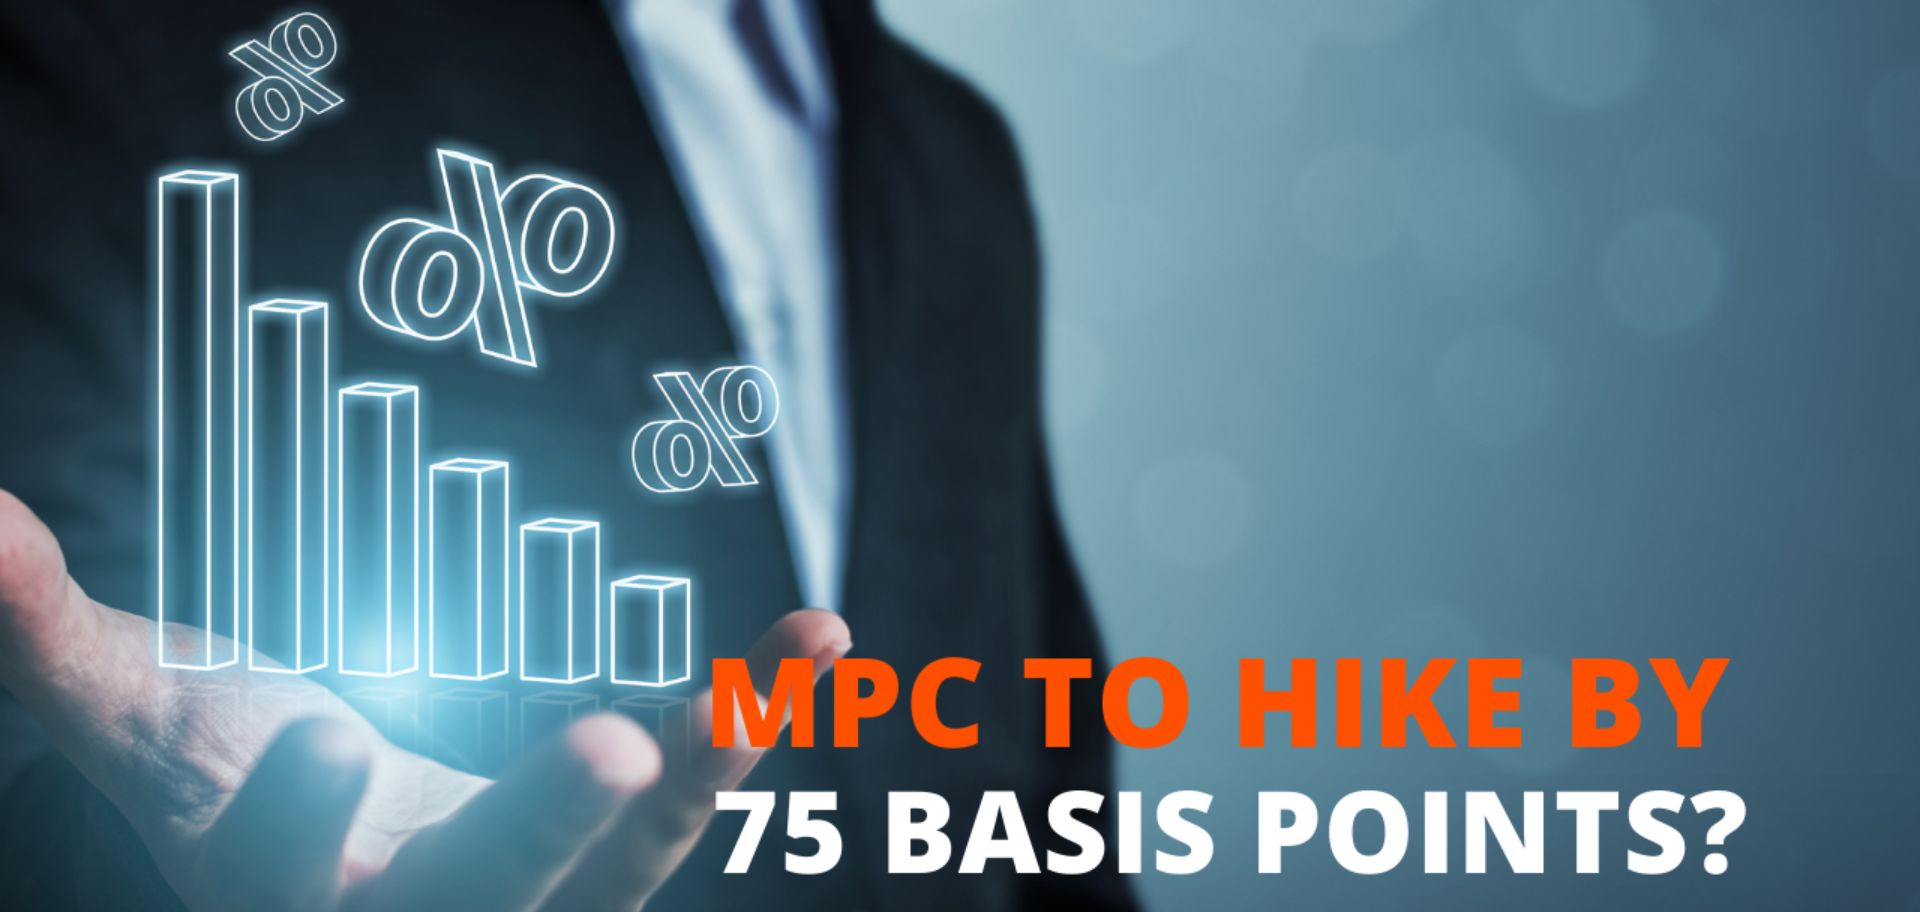 MPC to hike by 75 basis points?